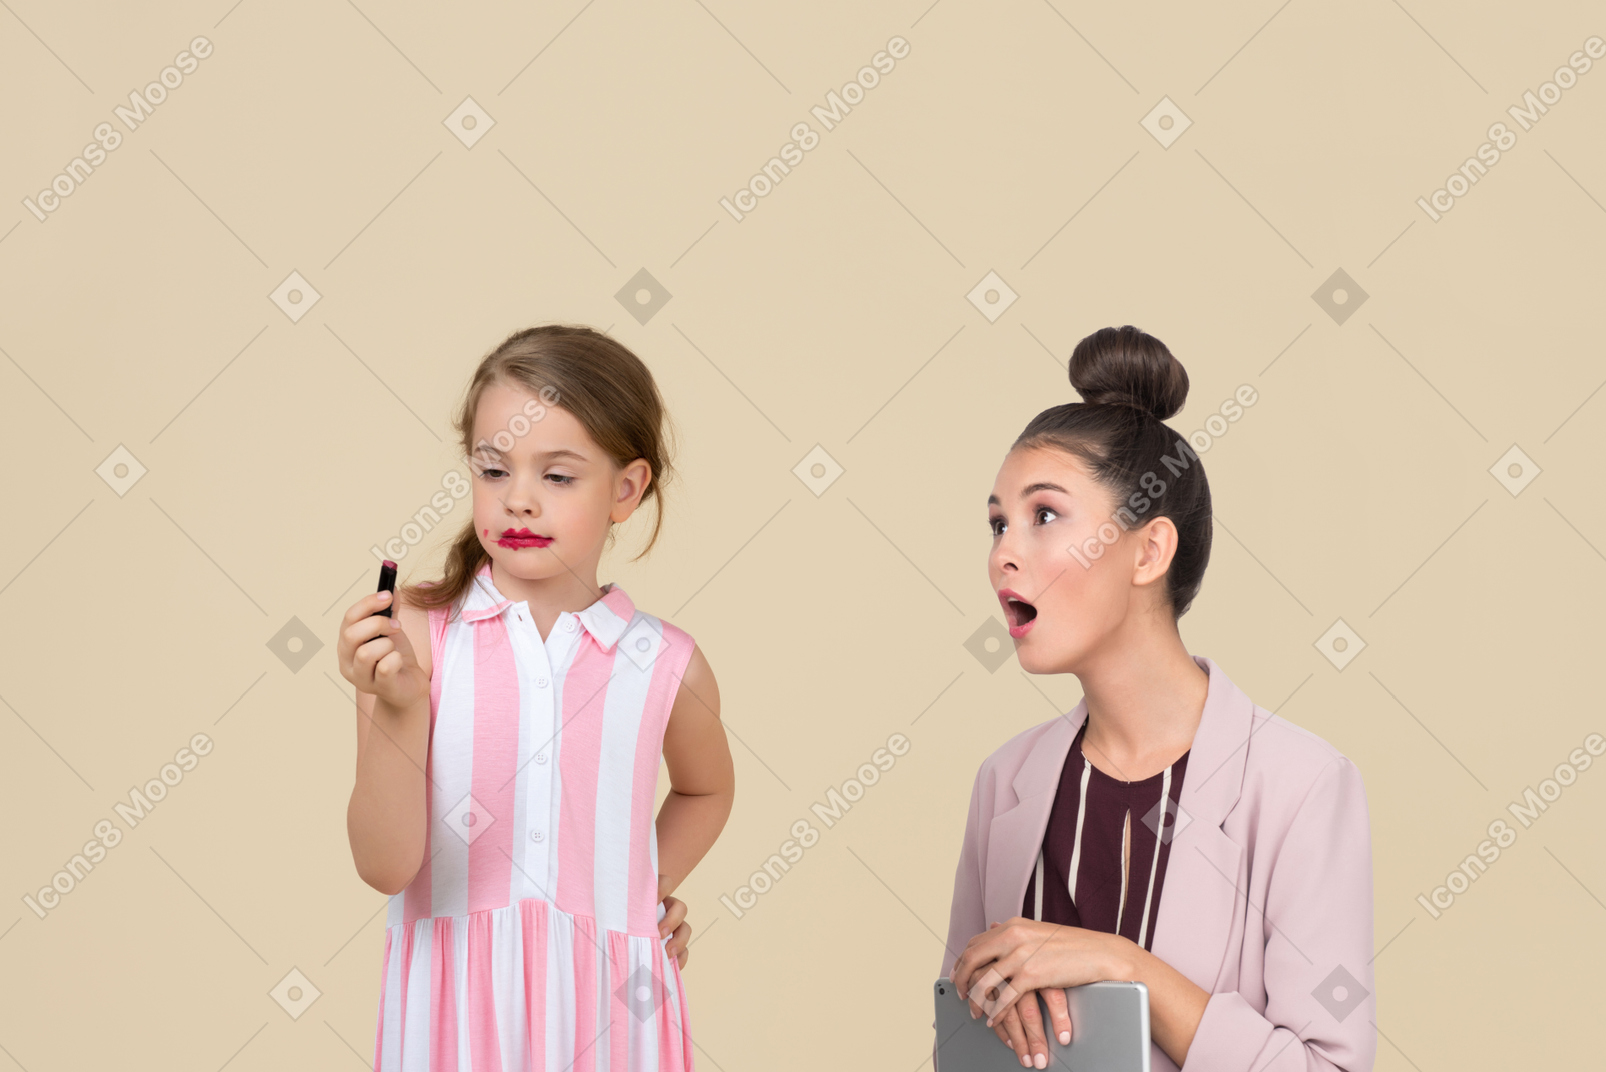 And how explain it to a child that you can't steal mom's brand cosmetic?